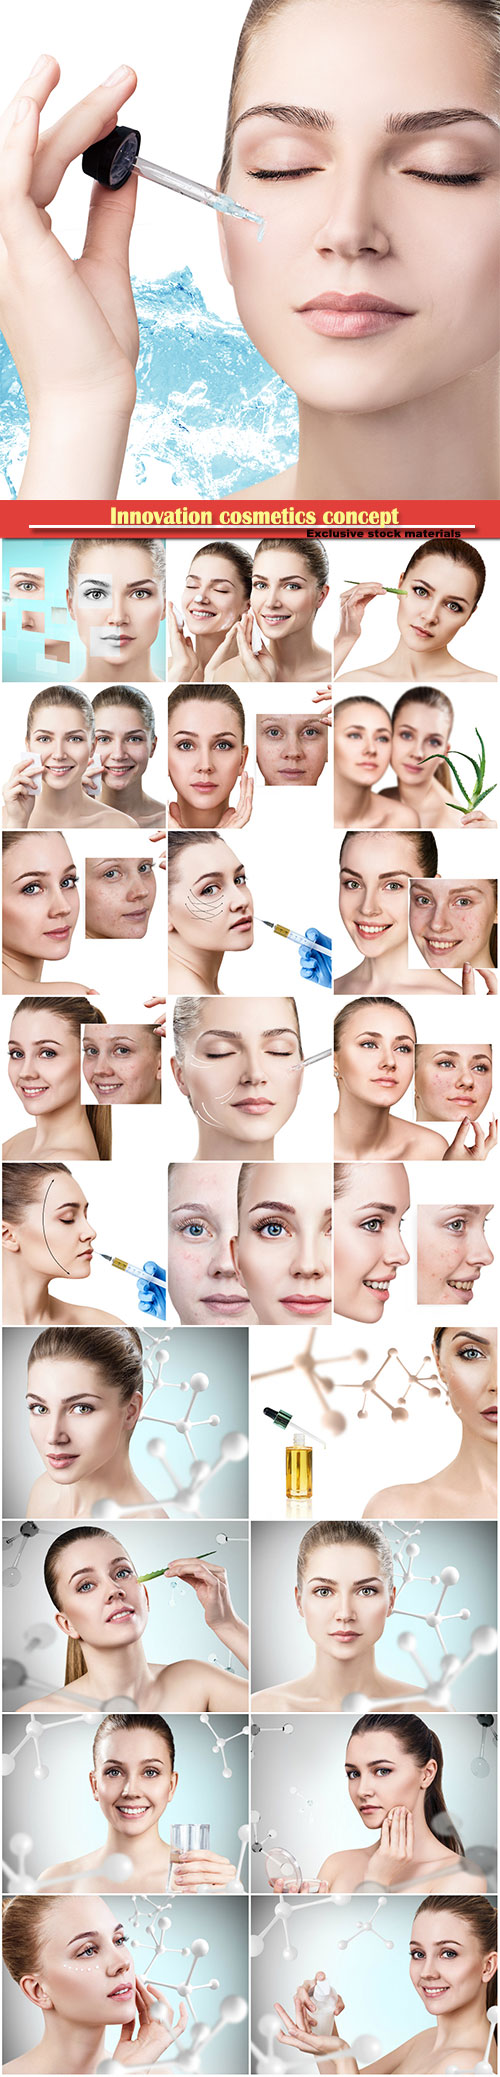 Innovation cosmetics concept, young woman cleanses skin